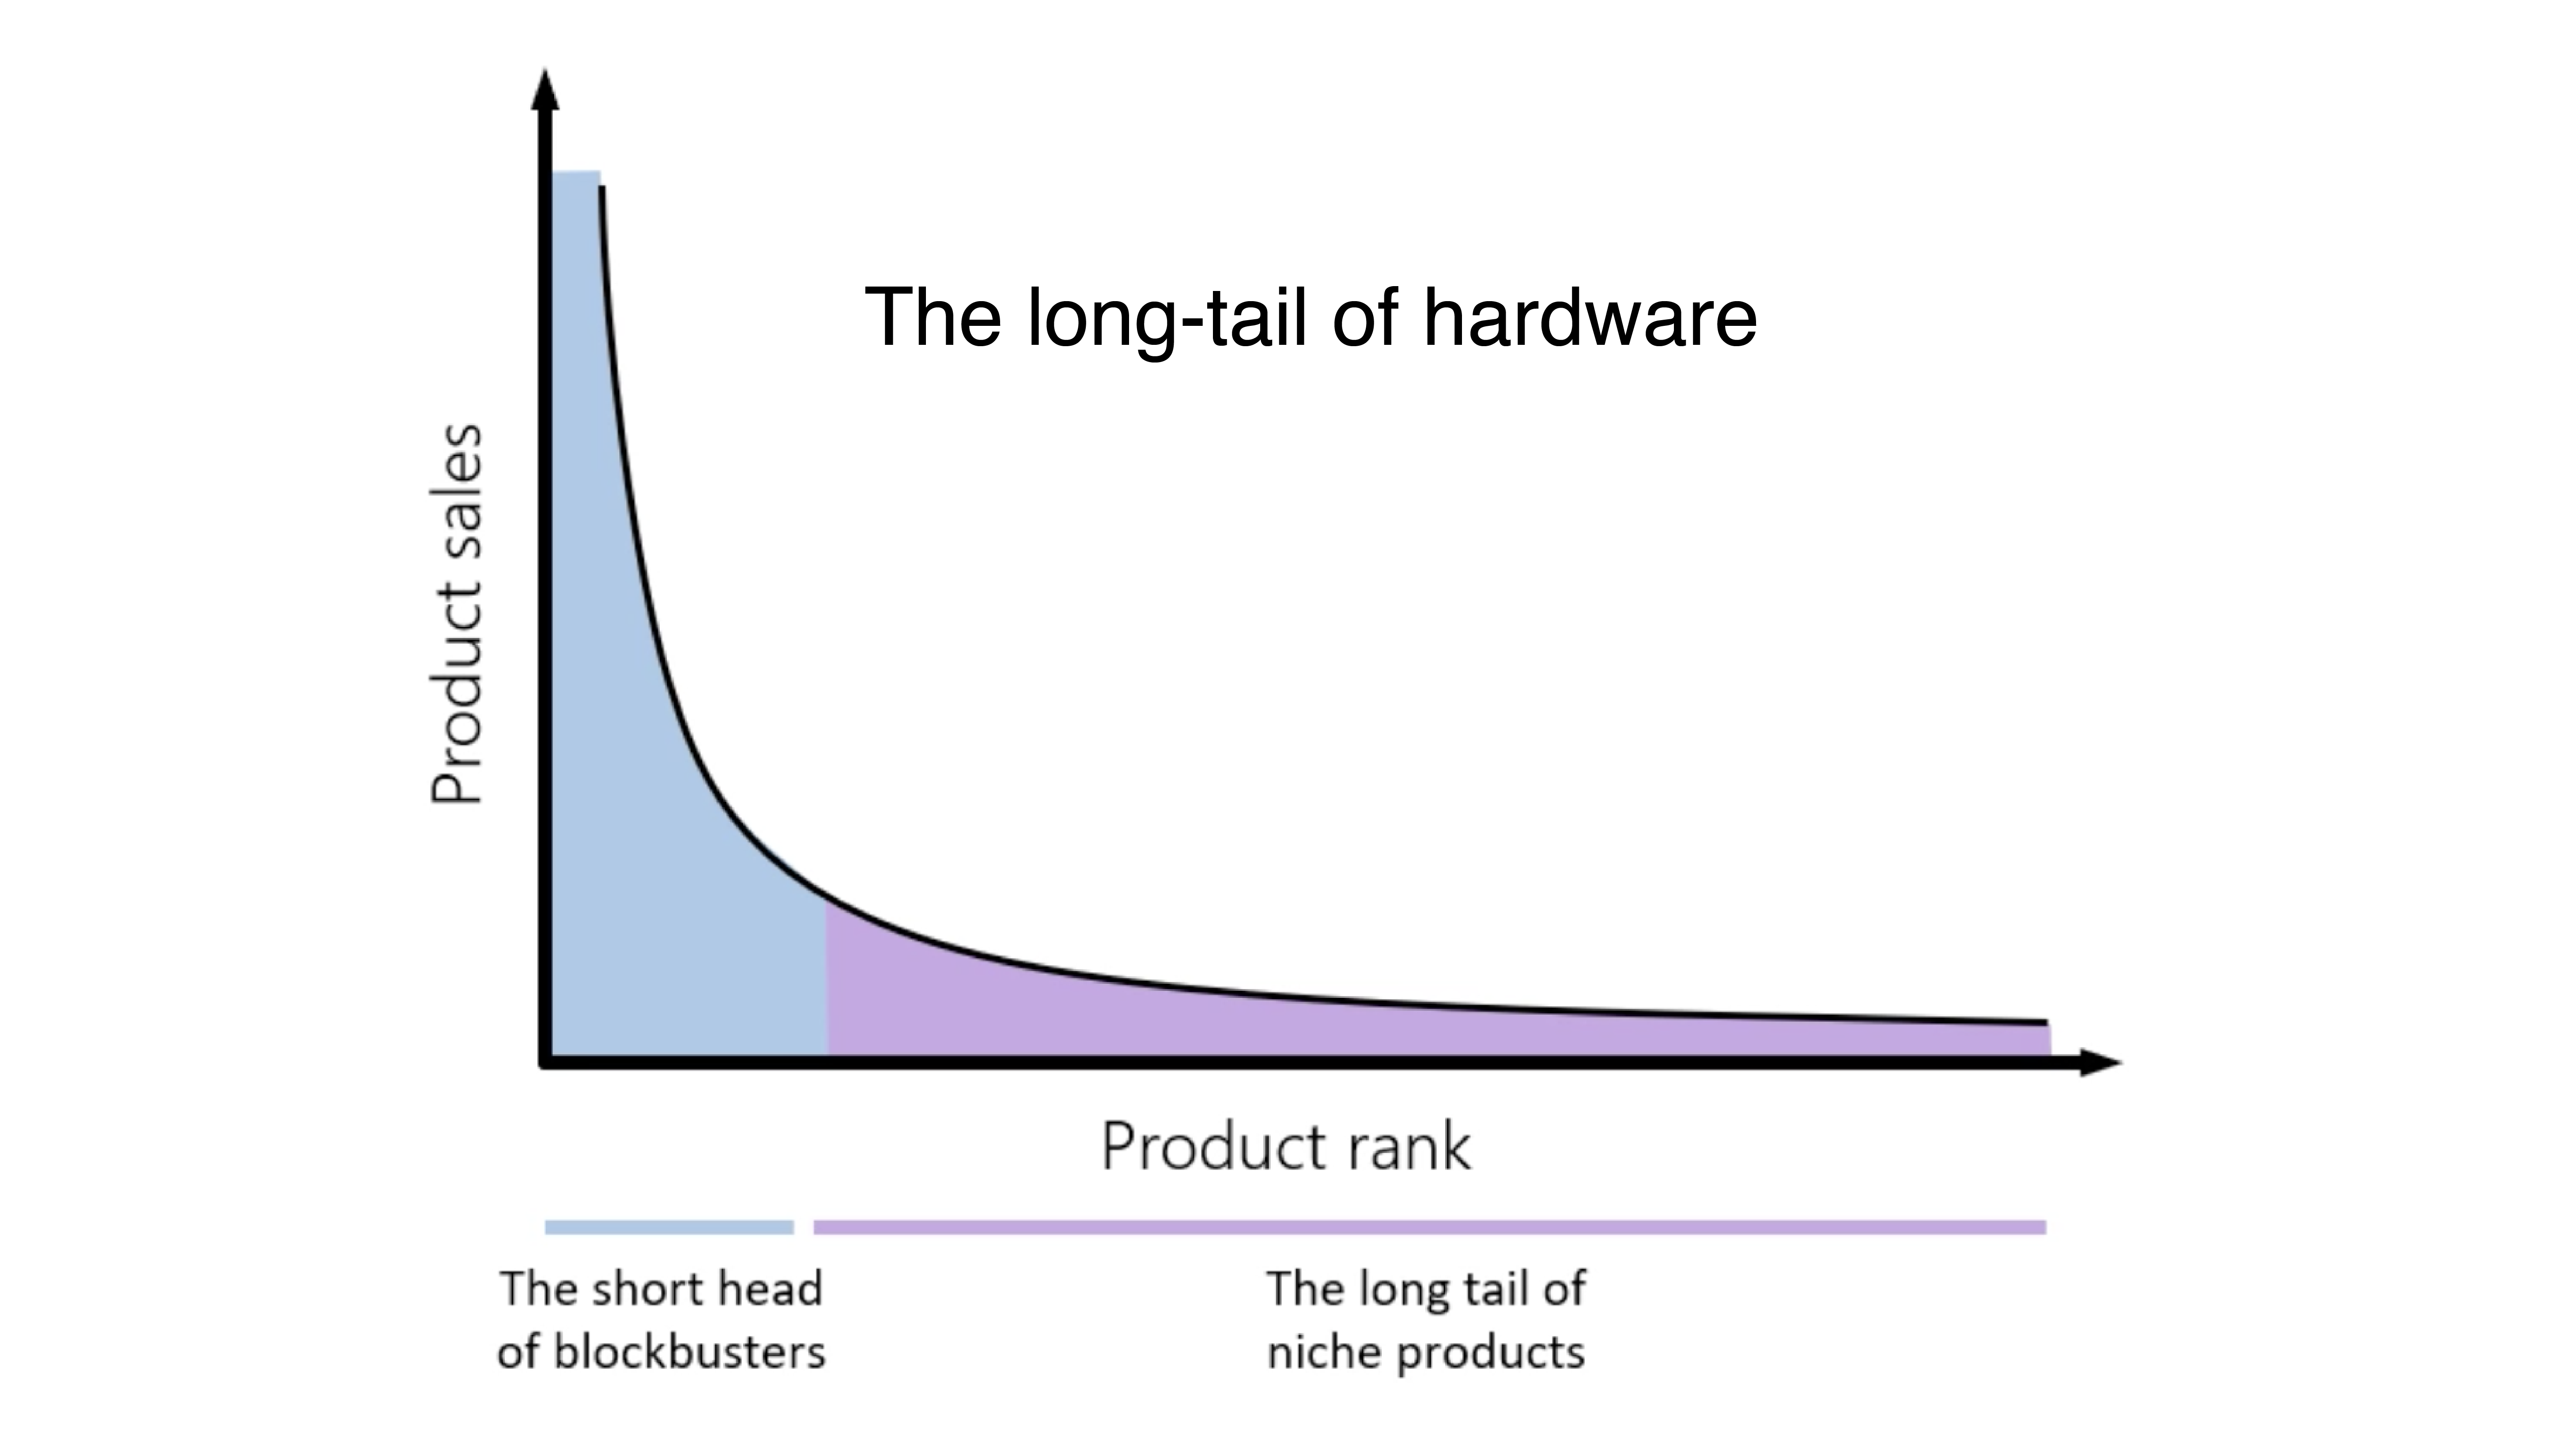 the long-tail of hardware